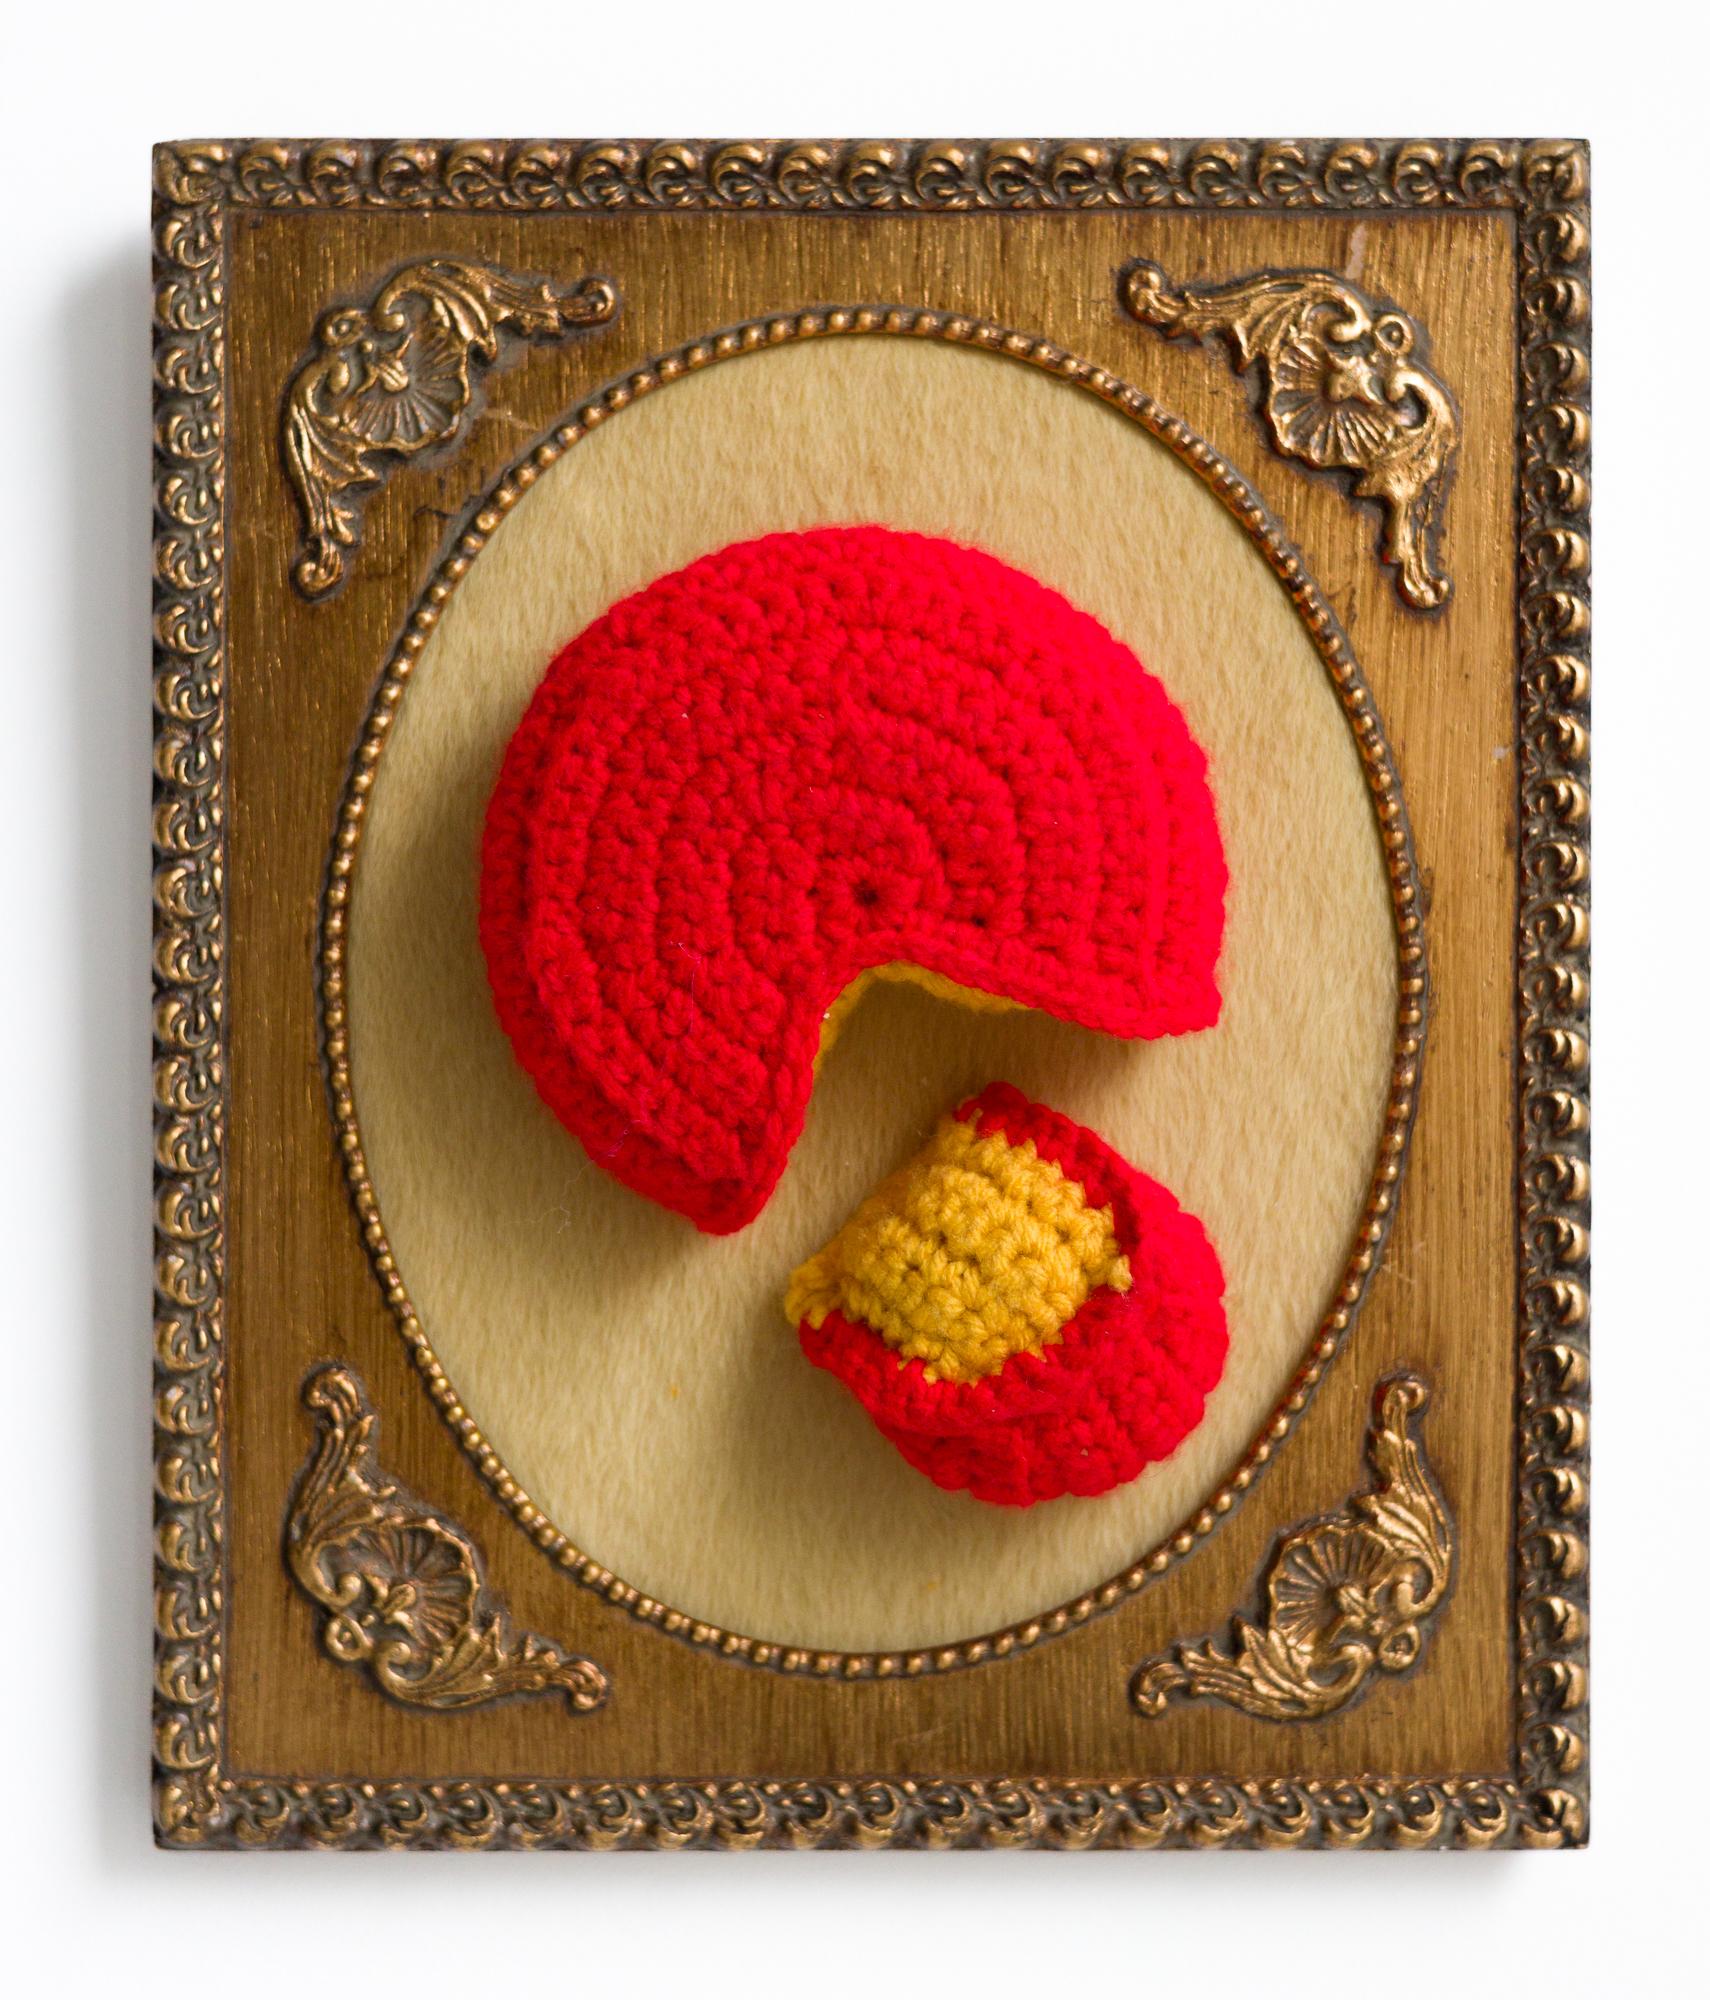 "Gouda Cheese", Food, Textiles, Crochet Acrylic in Vintage Frame - Art by Nicole Nikolich, Lace in the Moon